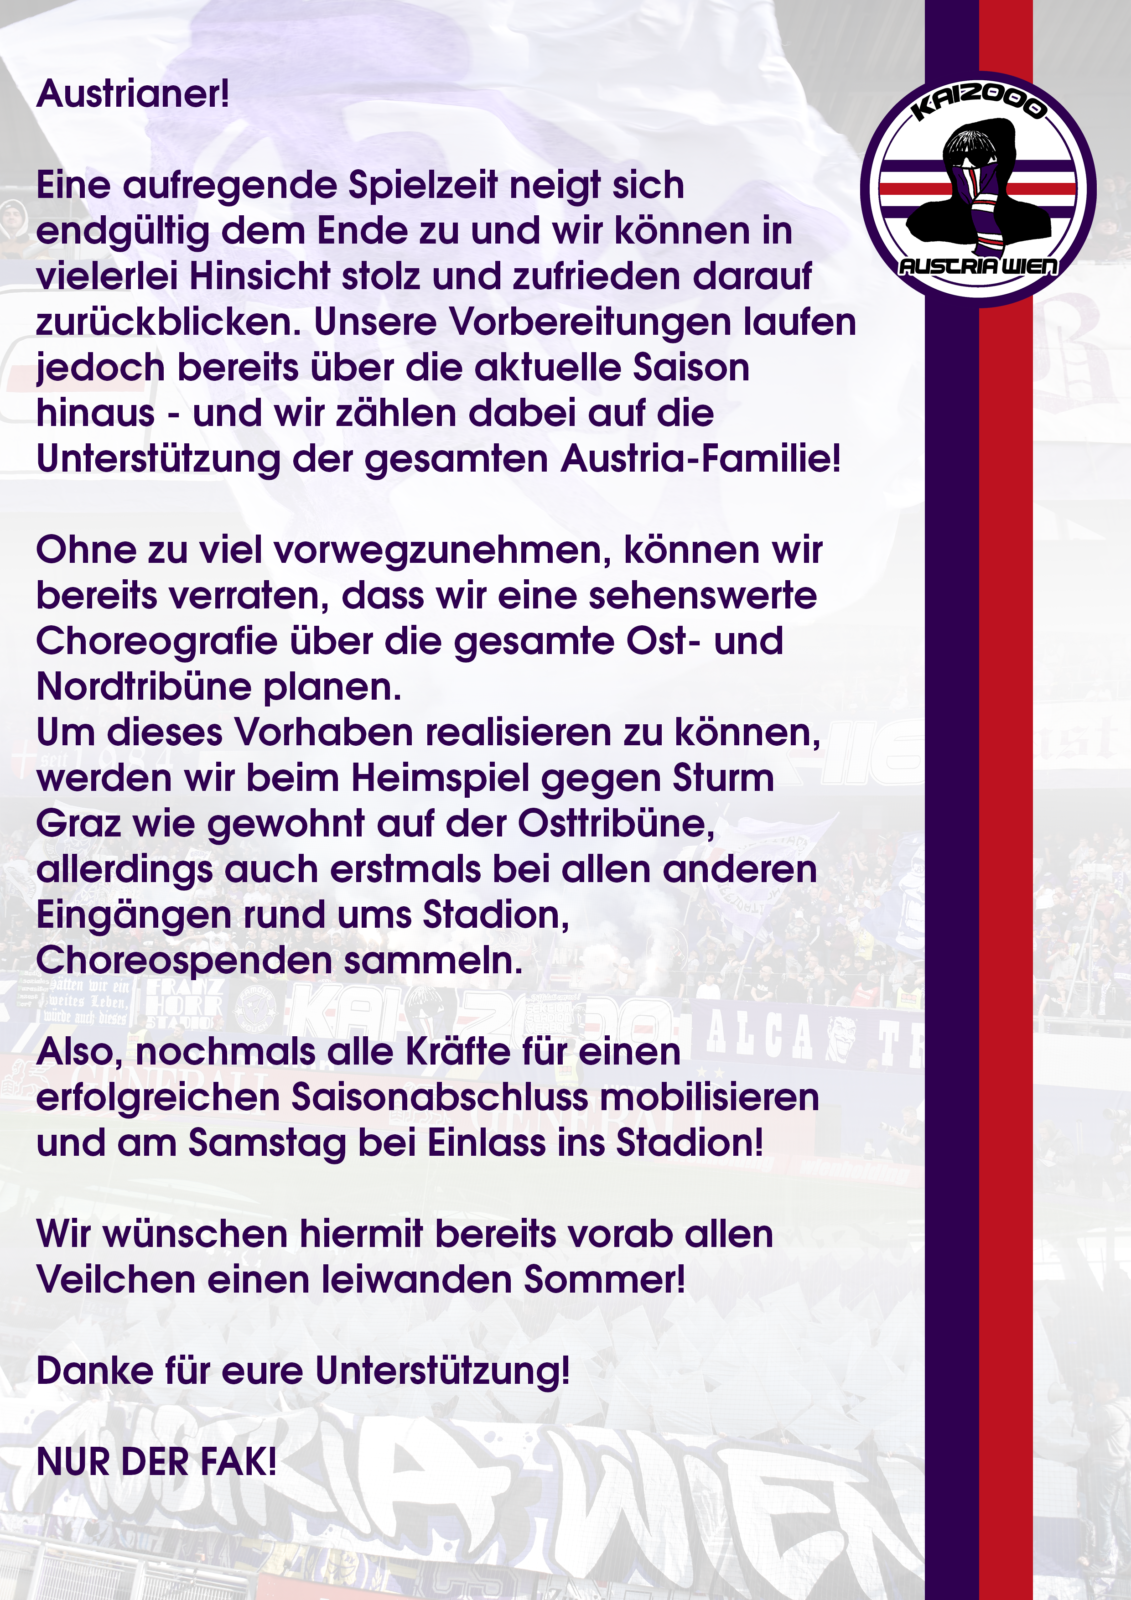 https://www.austriansoccerboard.at/uploads/monthly_2022_05/image.png.72794ad09d47baeced114892e440bdef.png